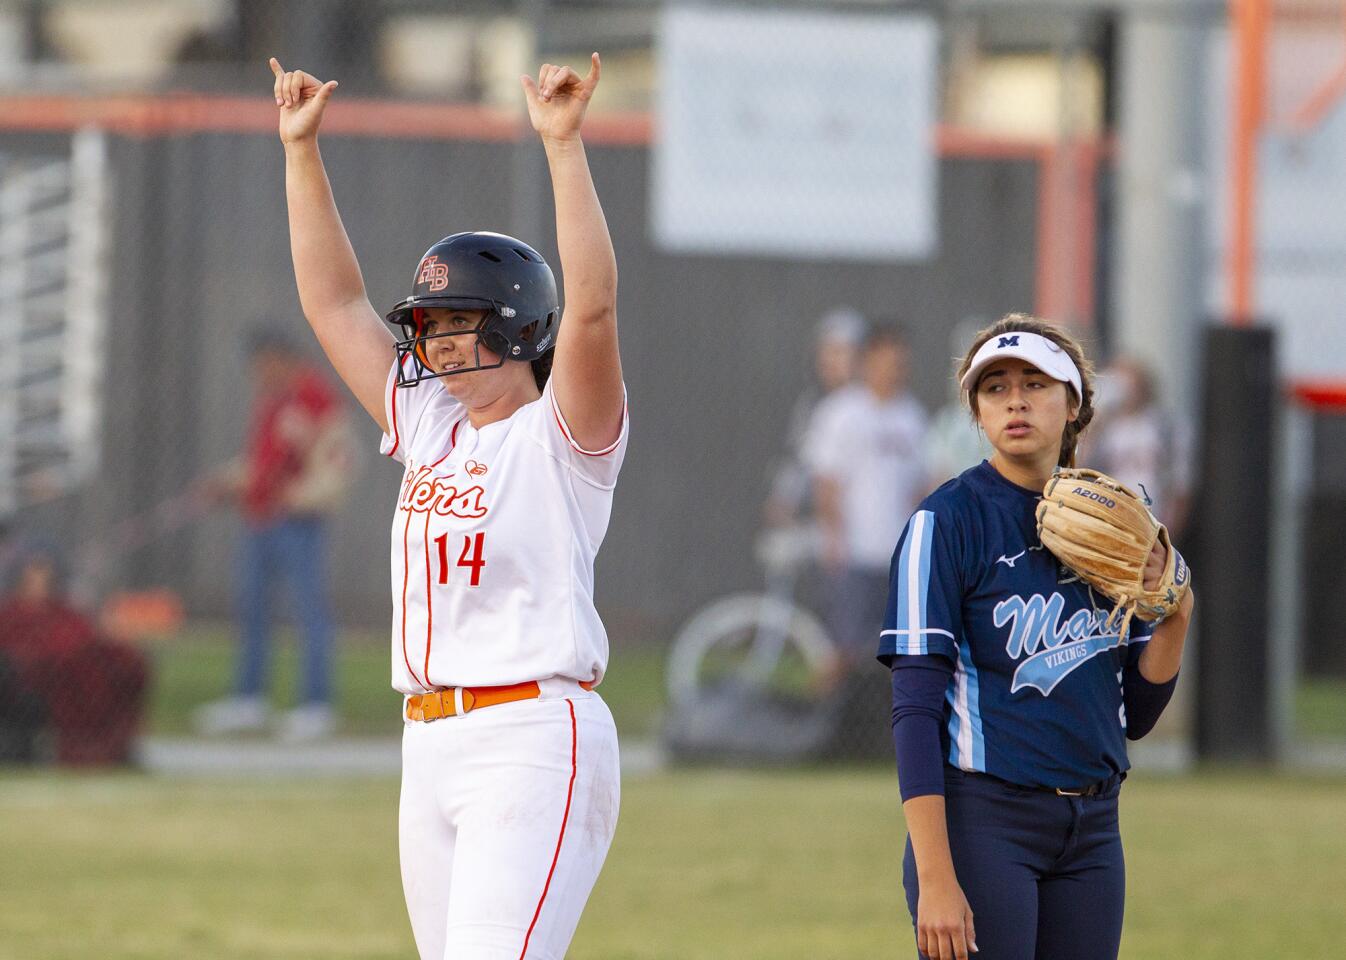 Huntington Beach High's Reanna Rudd gestures to the dugout after hitting an RBI double in the fourth inning of a Surf League game against Marina at Huntington Beach on Tuesday.